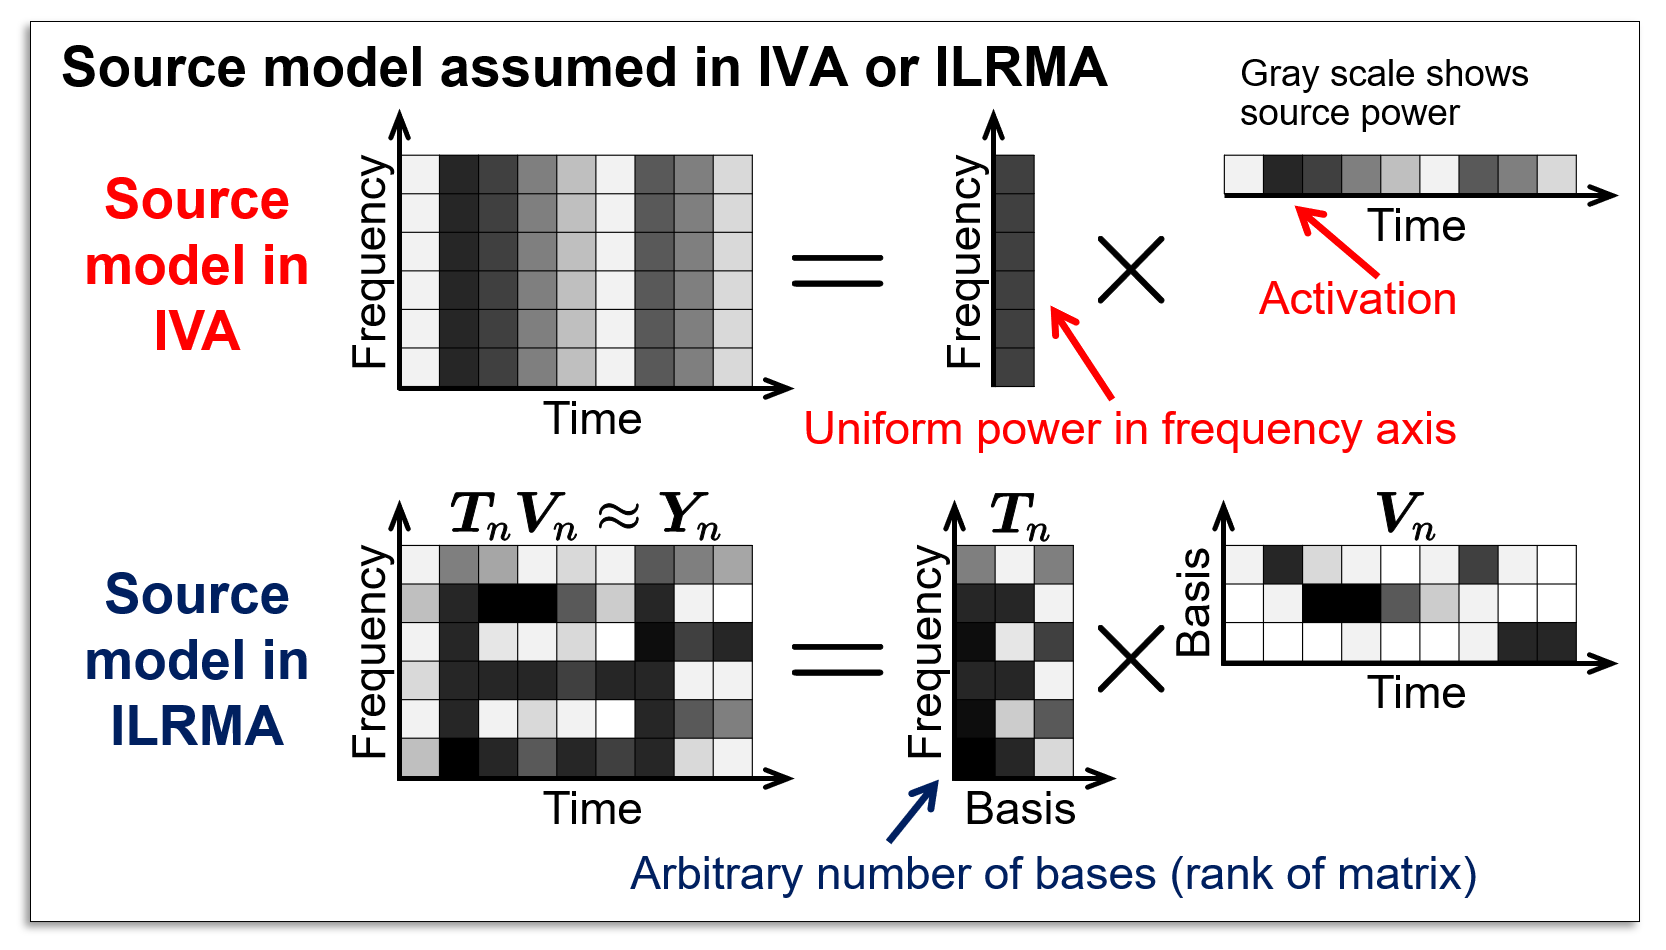 Figure of source models assumed in IVA and ILRMA